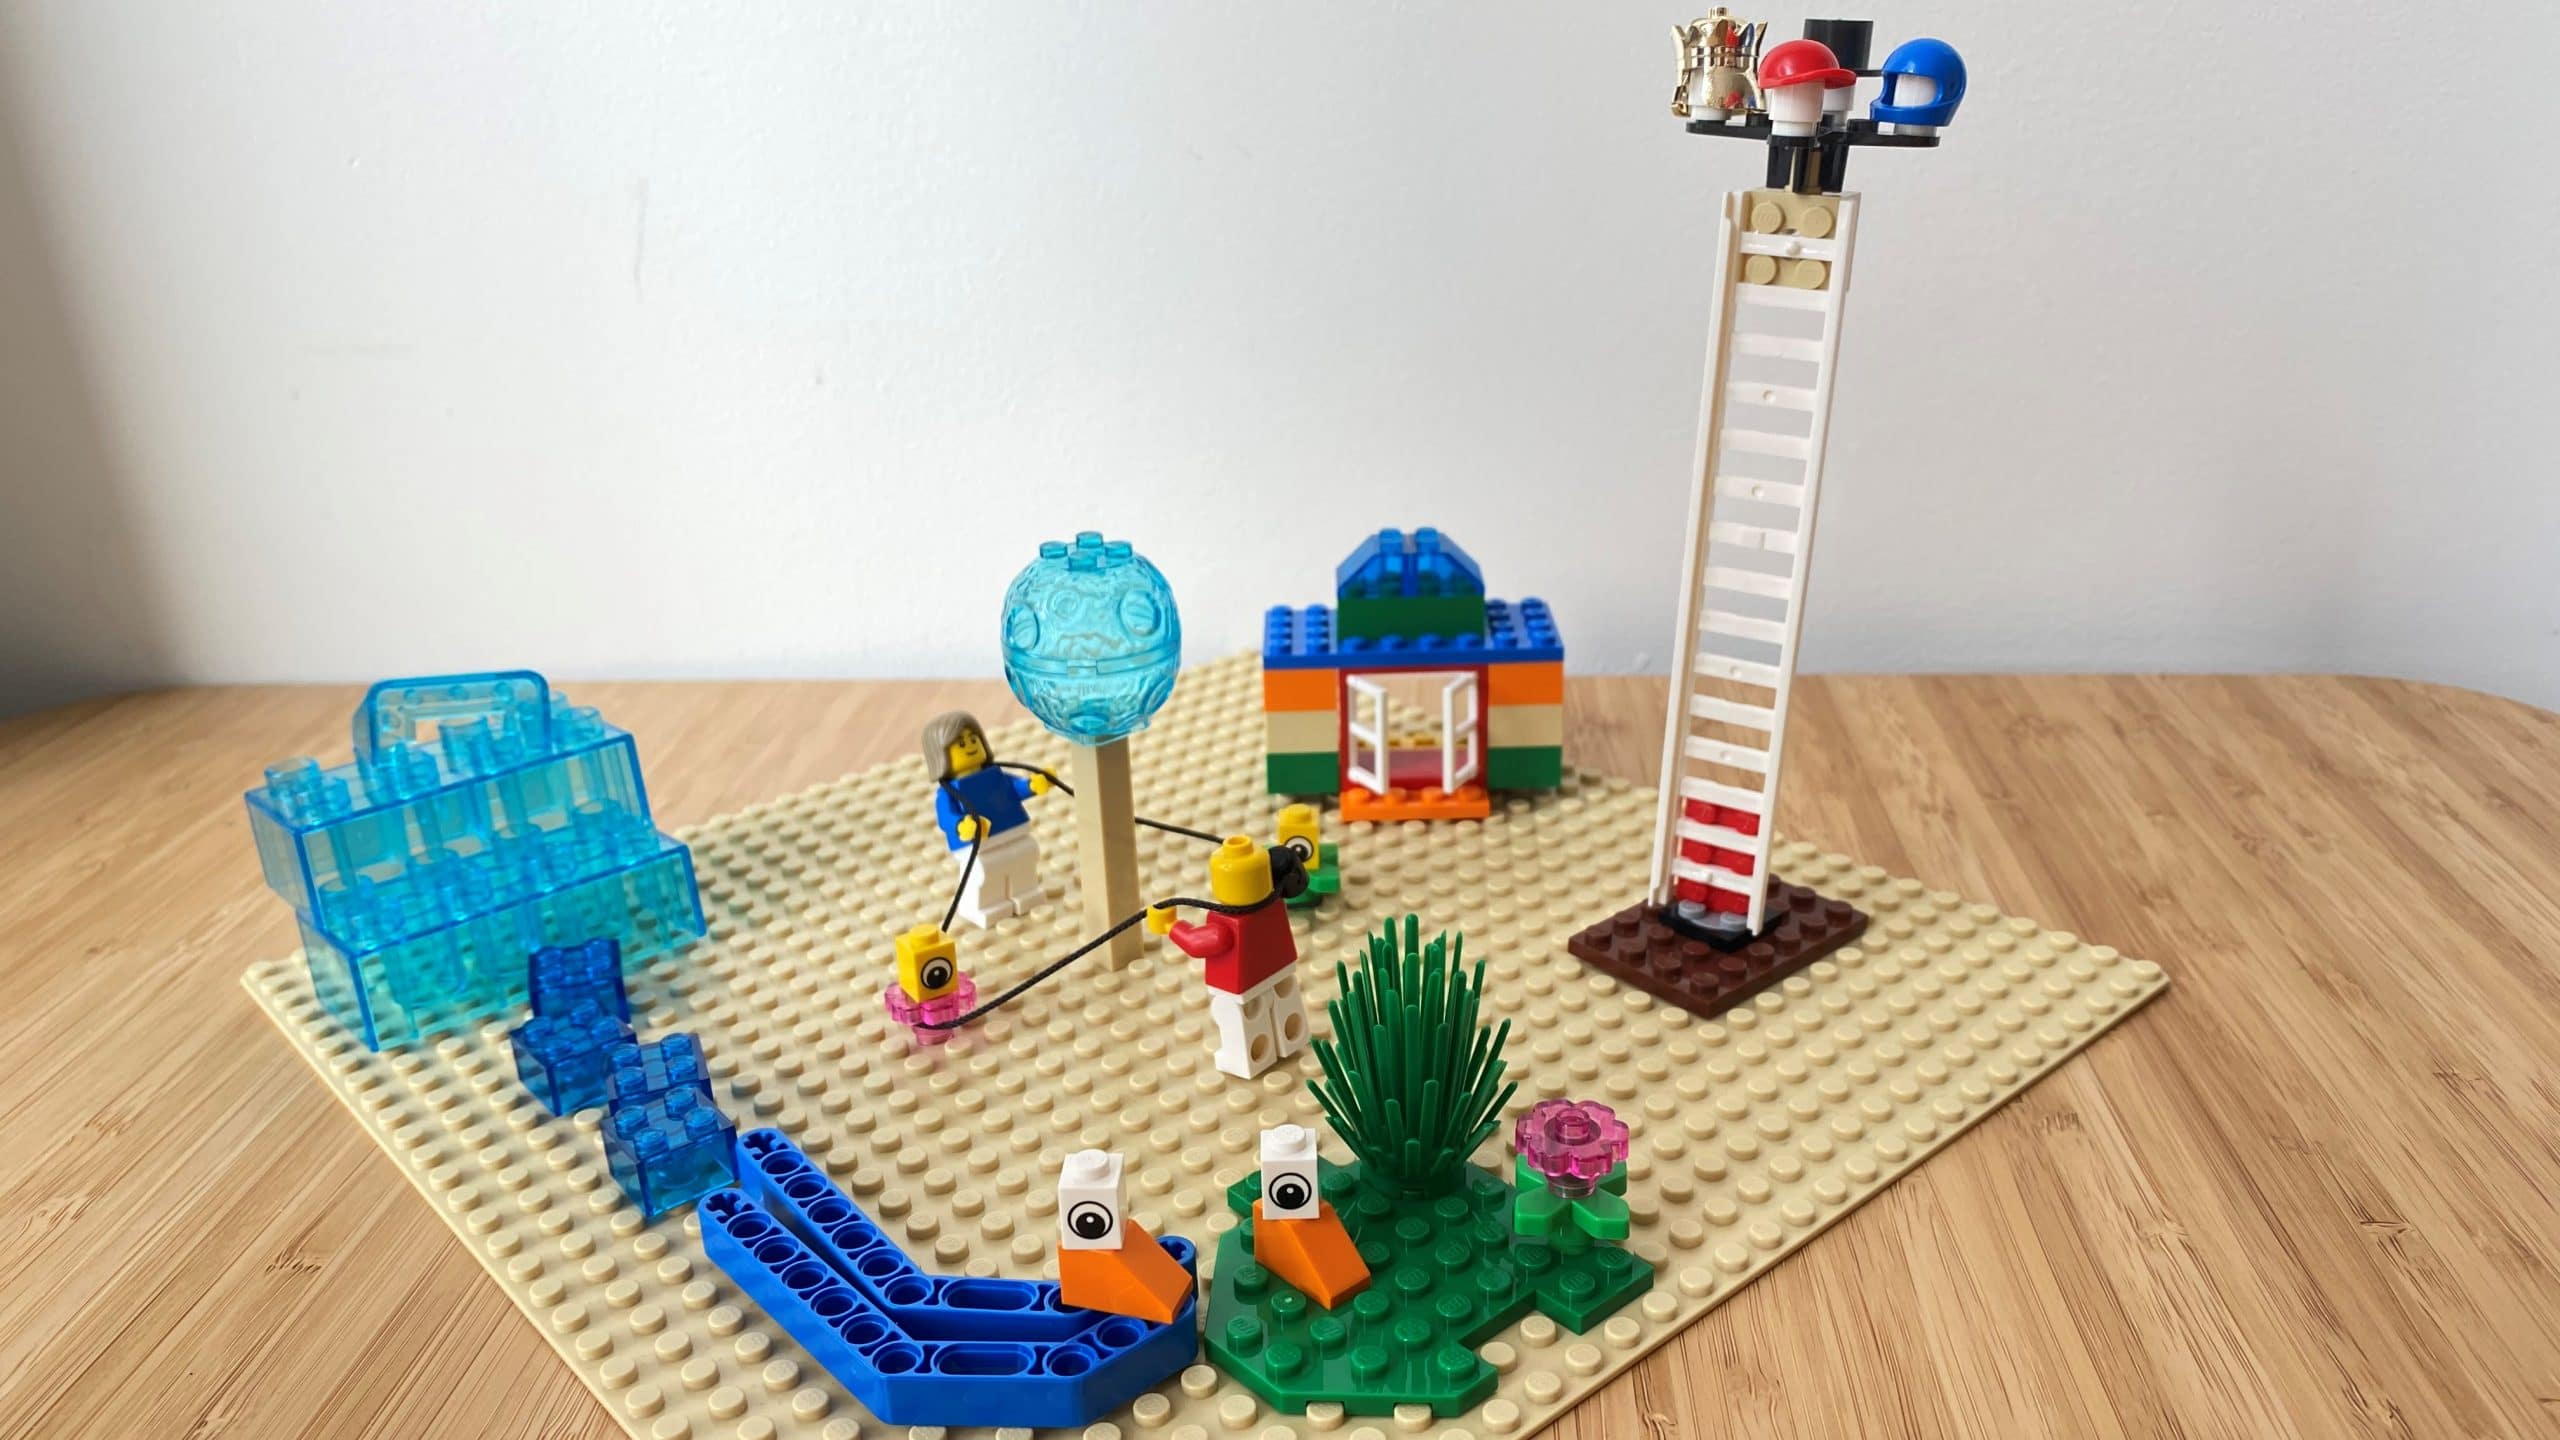 A LEGO Serious Play build showing various elements. The baseplate is lying on a timber desk with a white wall behind.